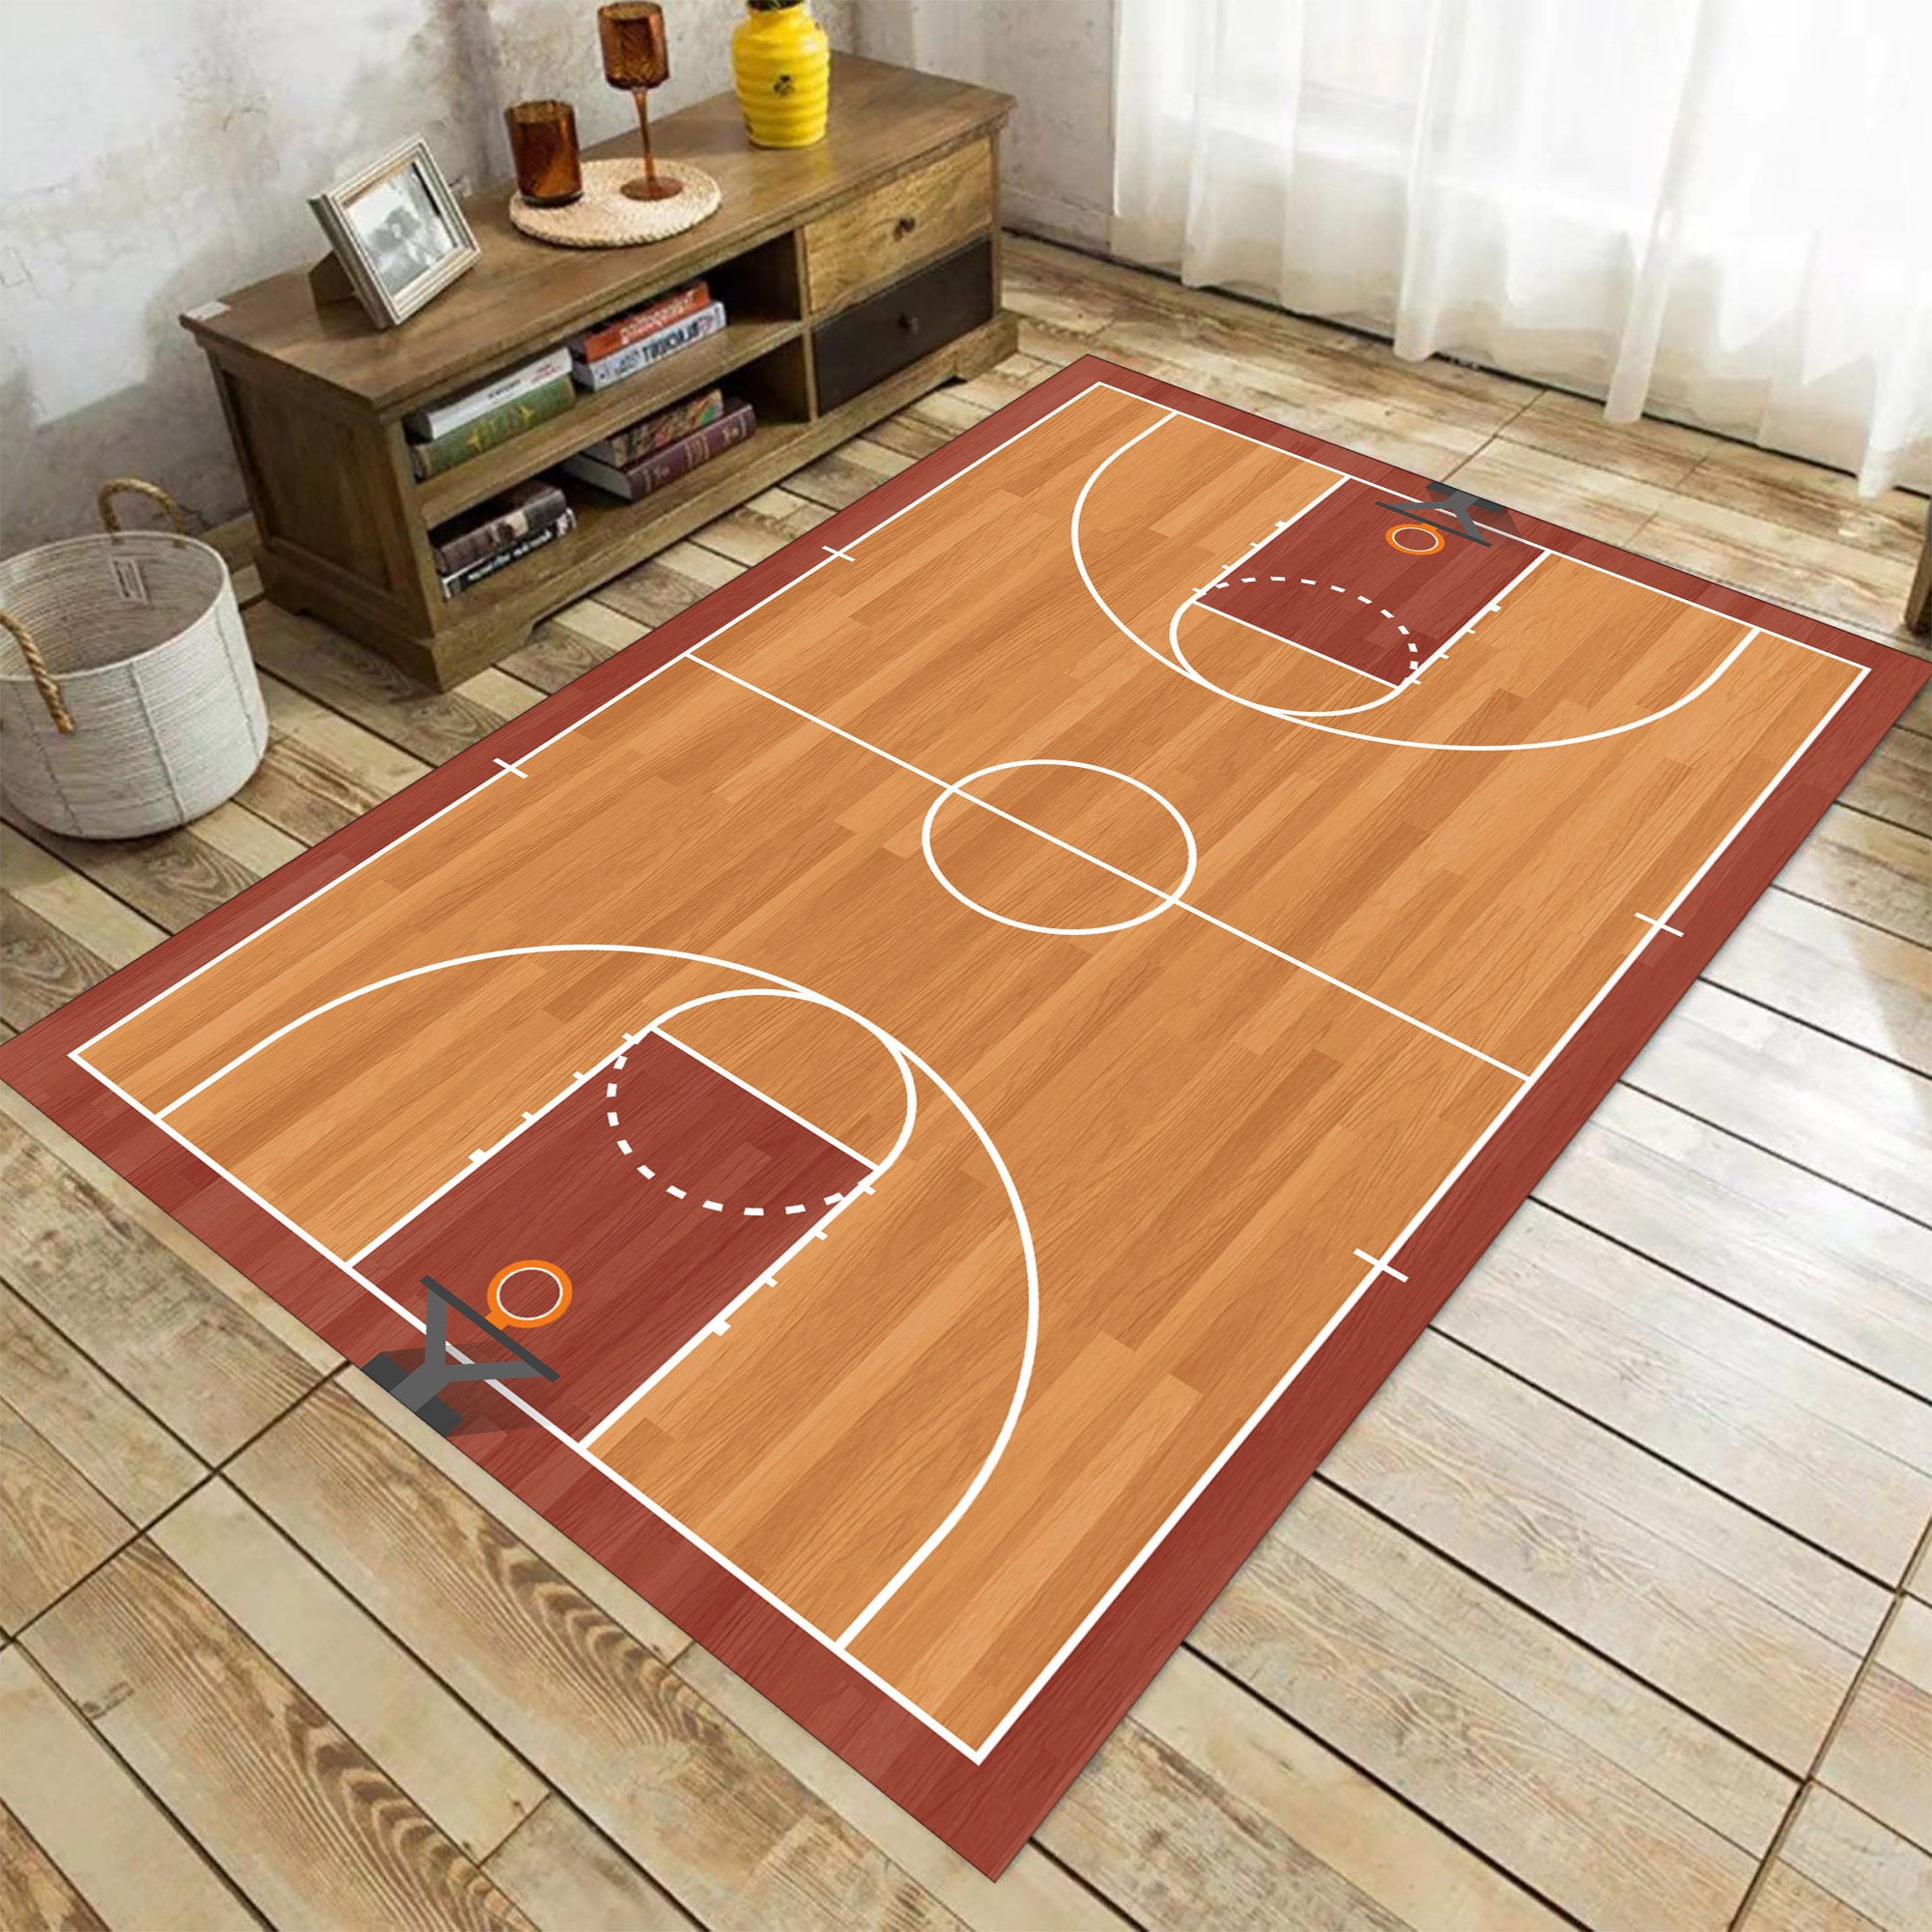 Pin by Floor Muñoz on basketball stickers